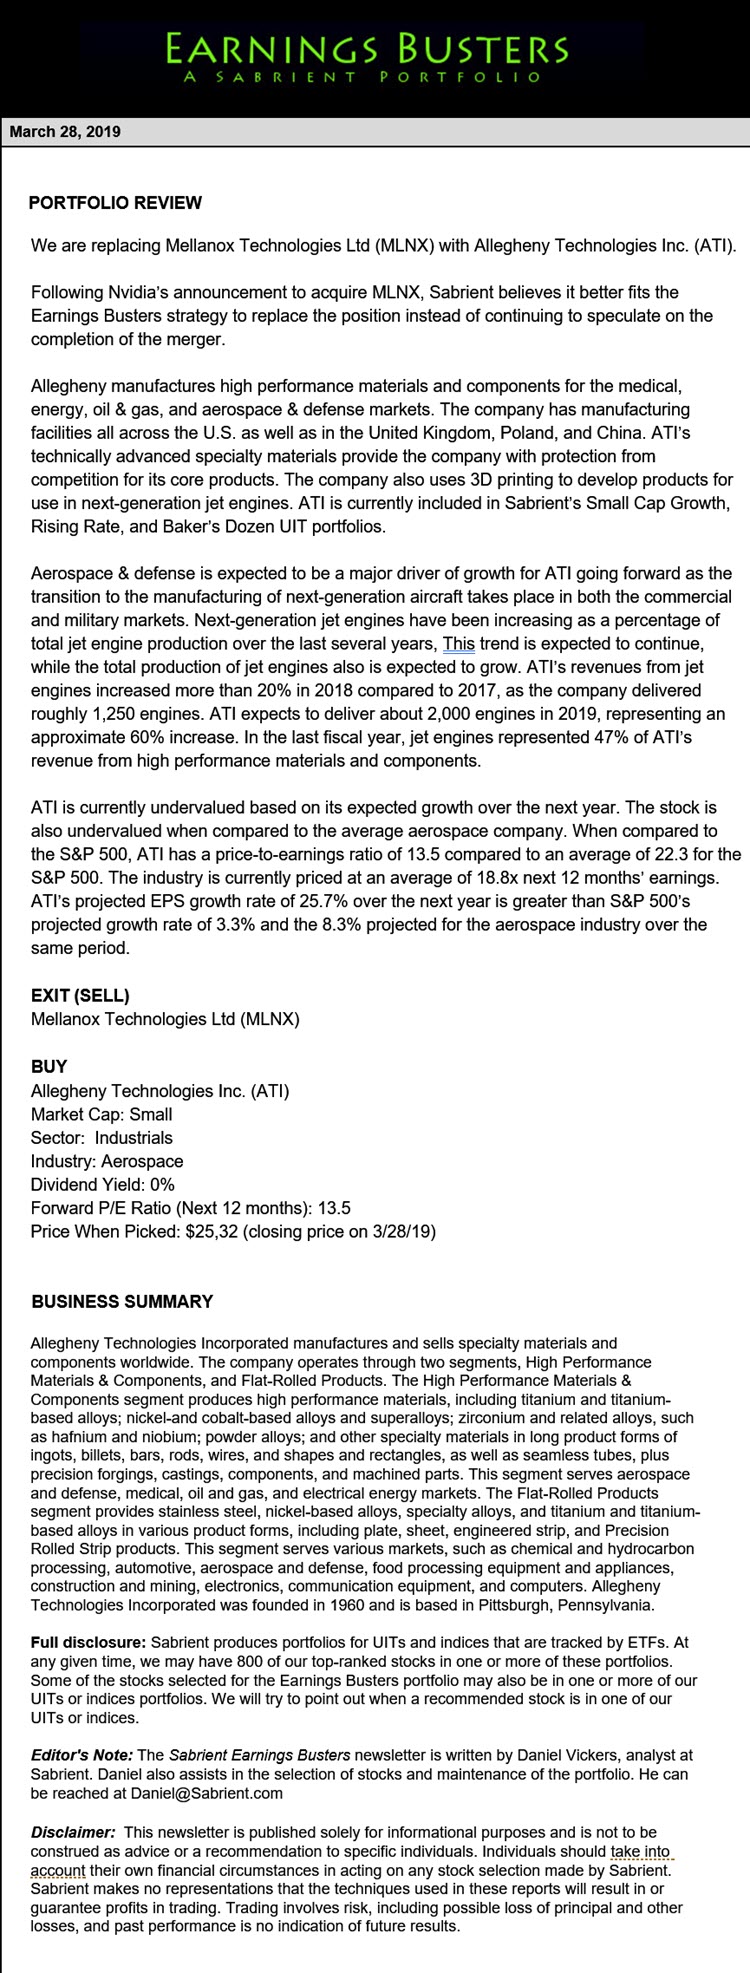 Earnings Busters Newsletter - March 28, 2019